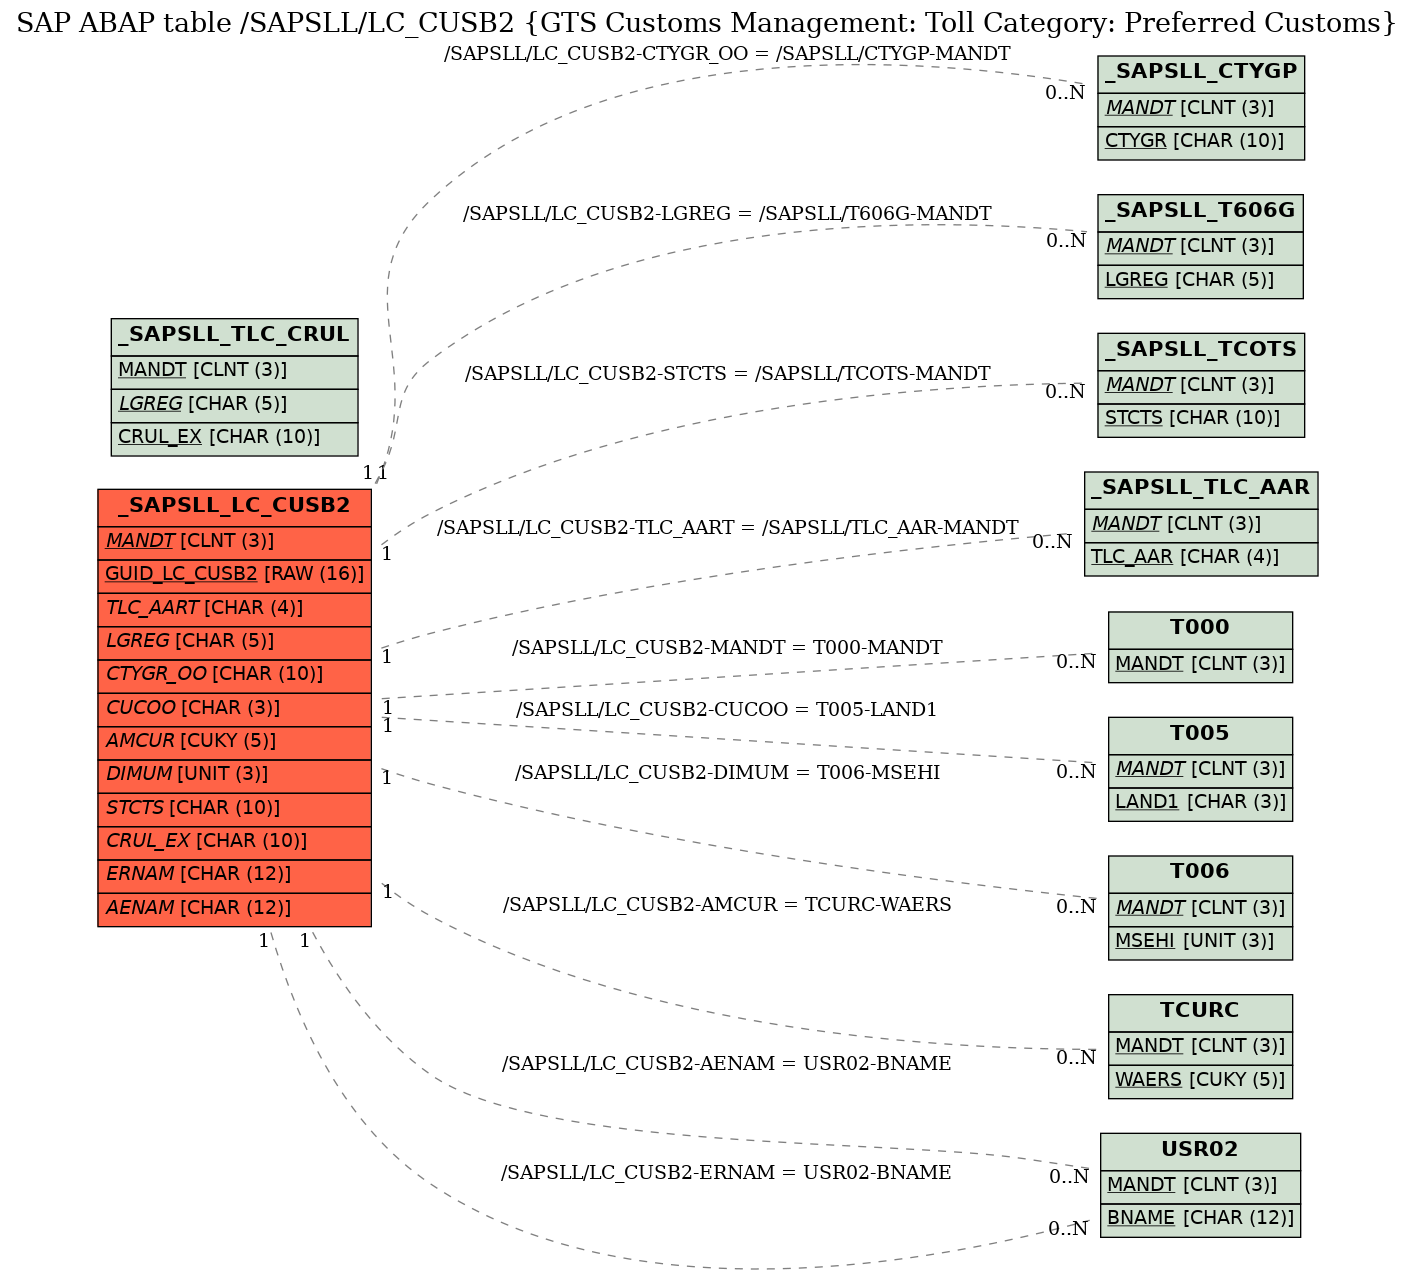 E-R Diagram for table /SAPSLL/LC_CUSB2 (GTS Customs Management: Toll Category: Preferred Customs)